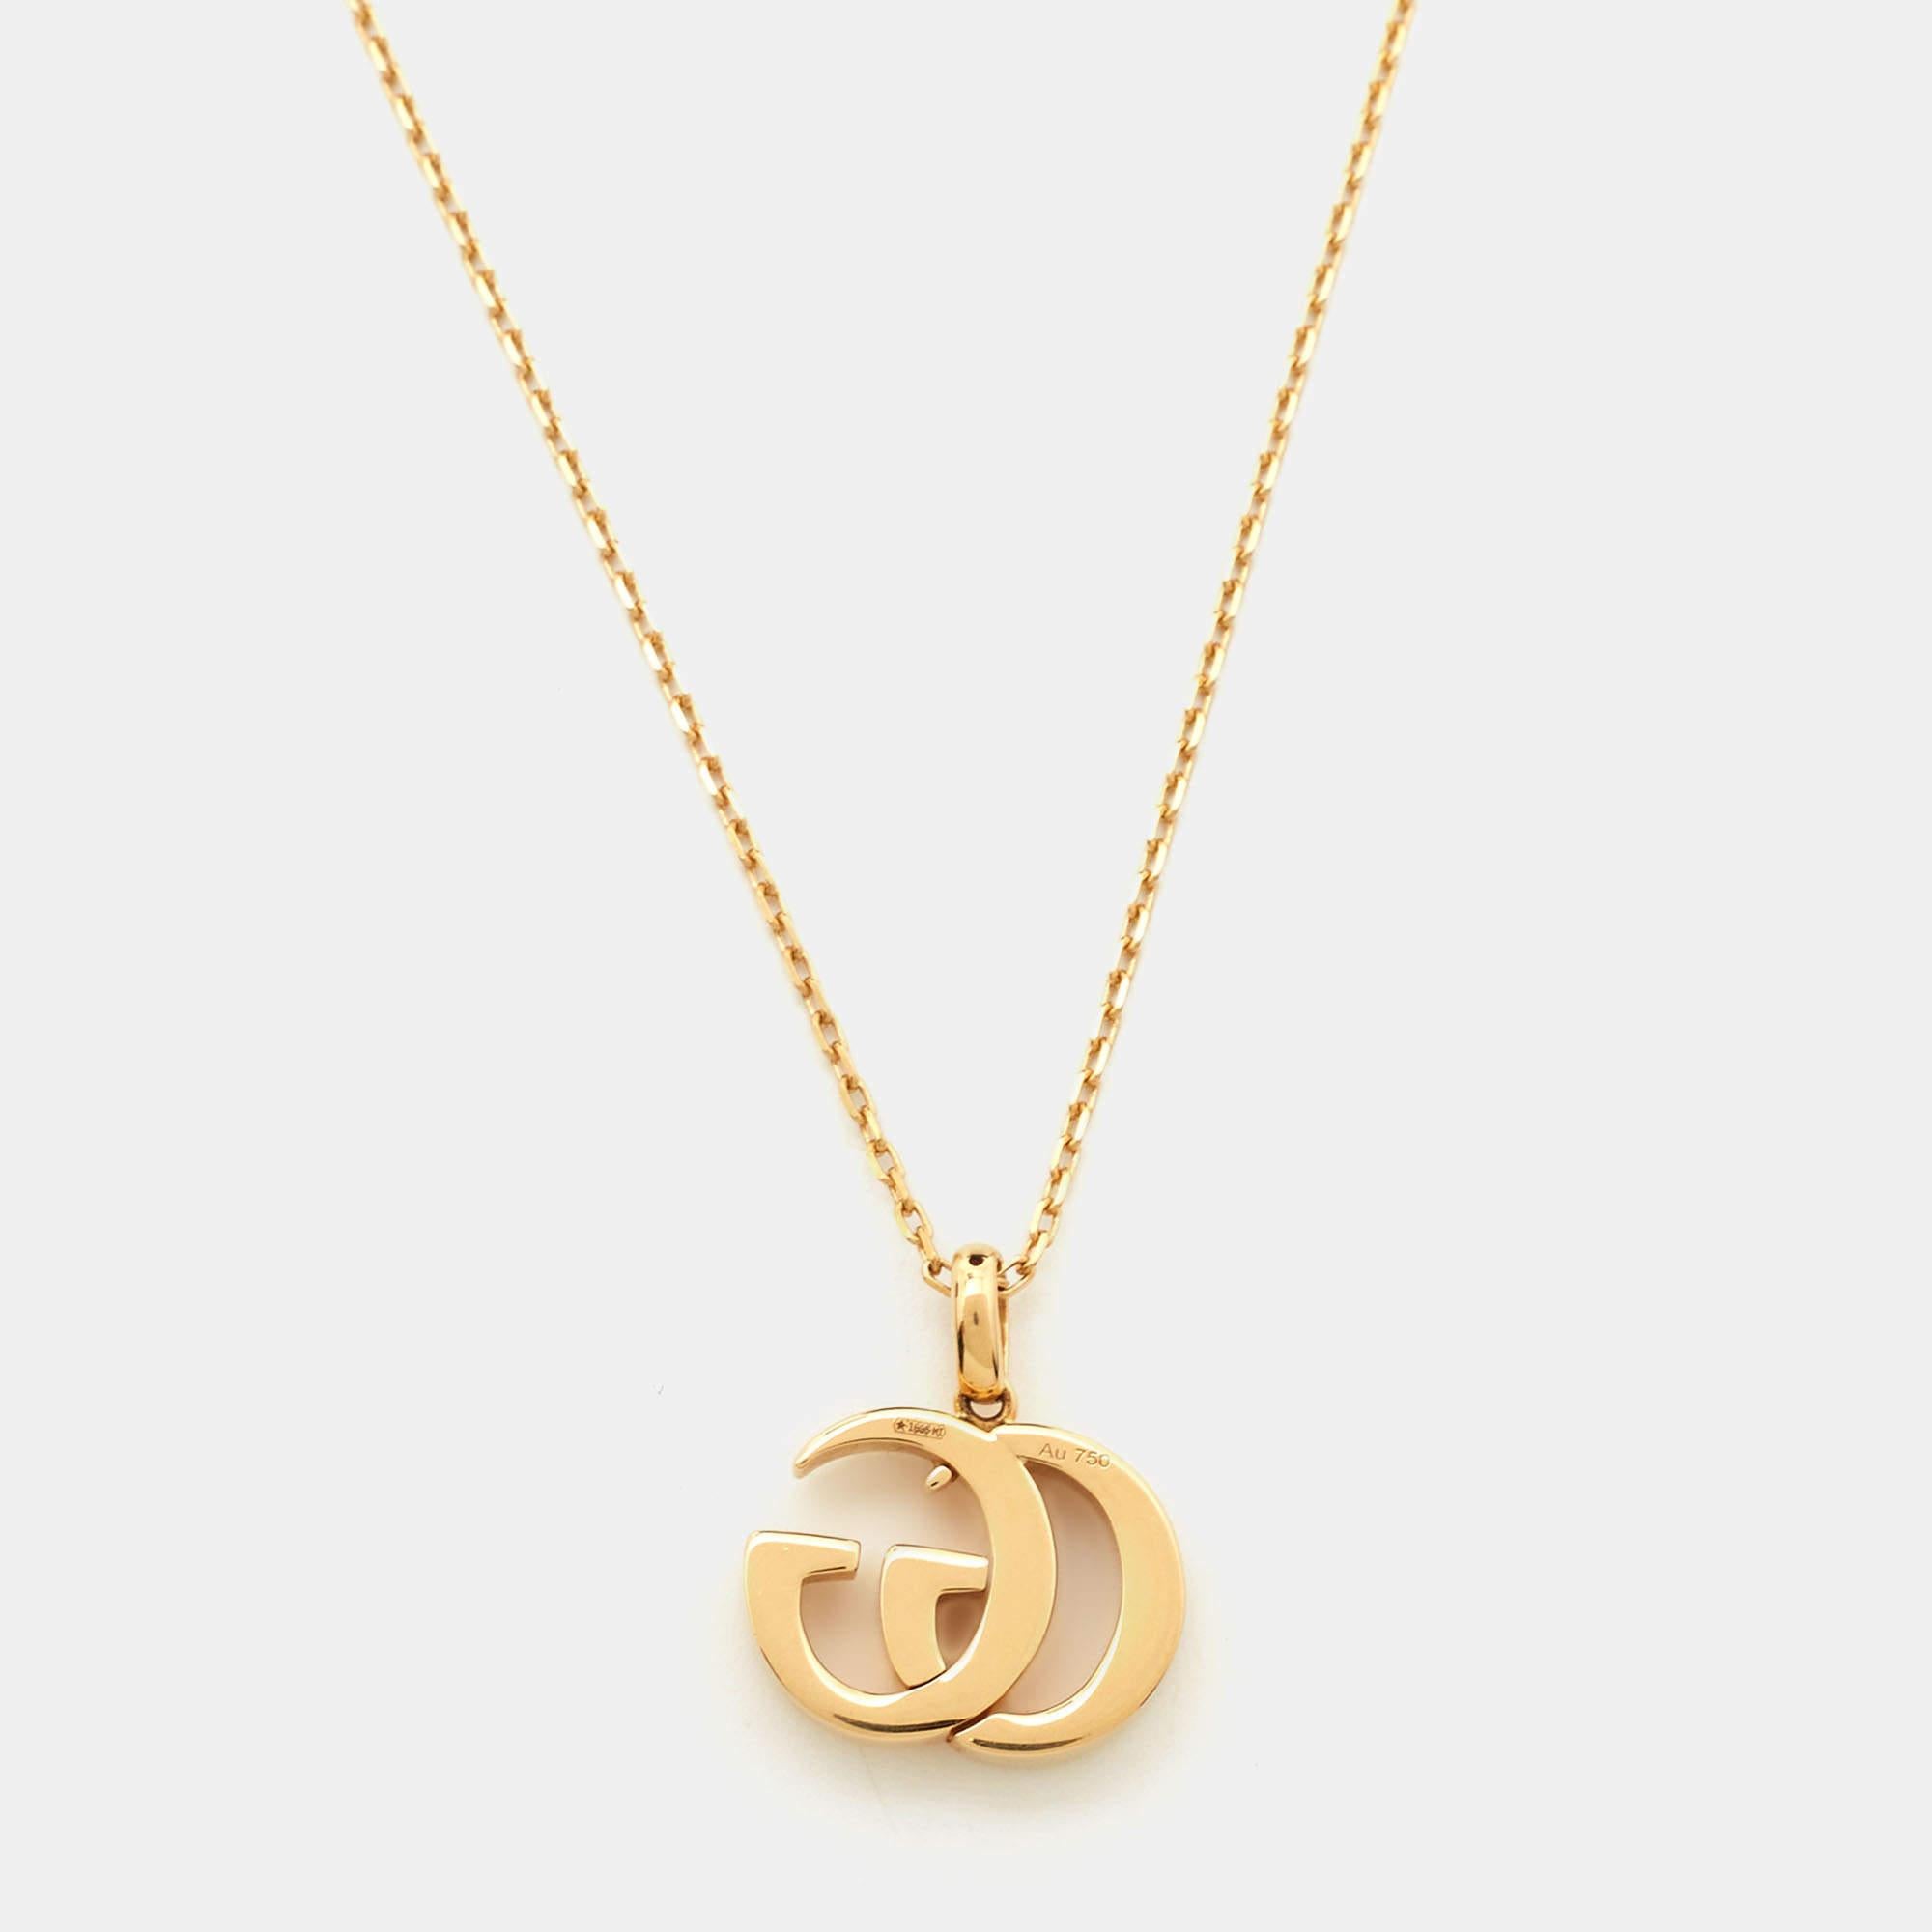 Gucci Double G 18k Yellow Gold Pendant Necklace 1